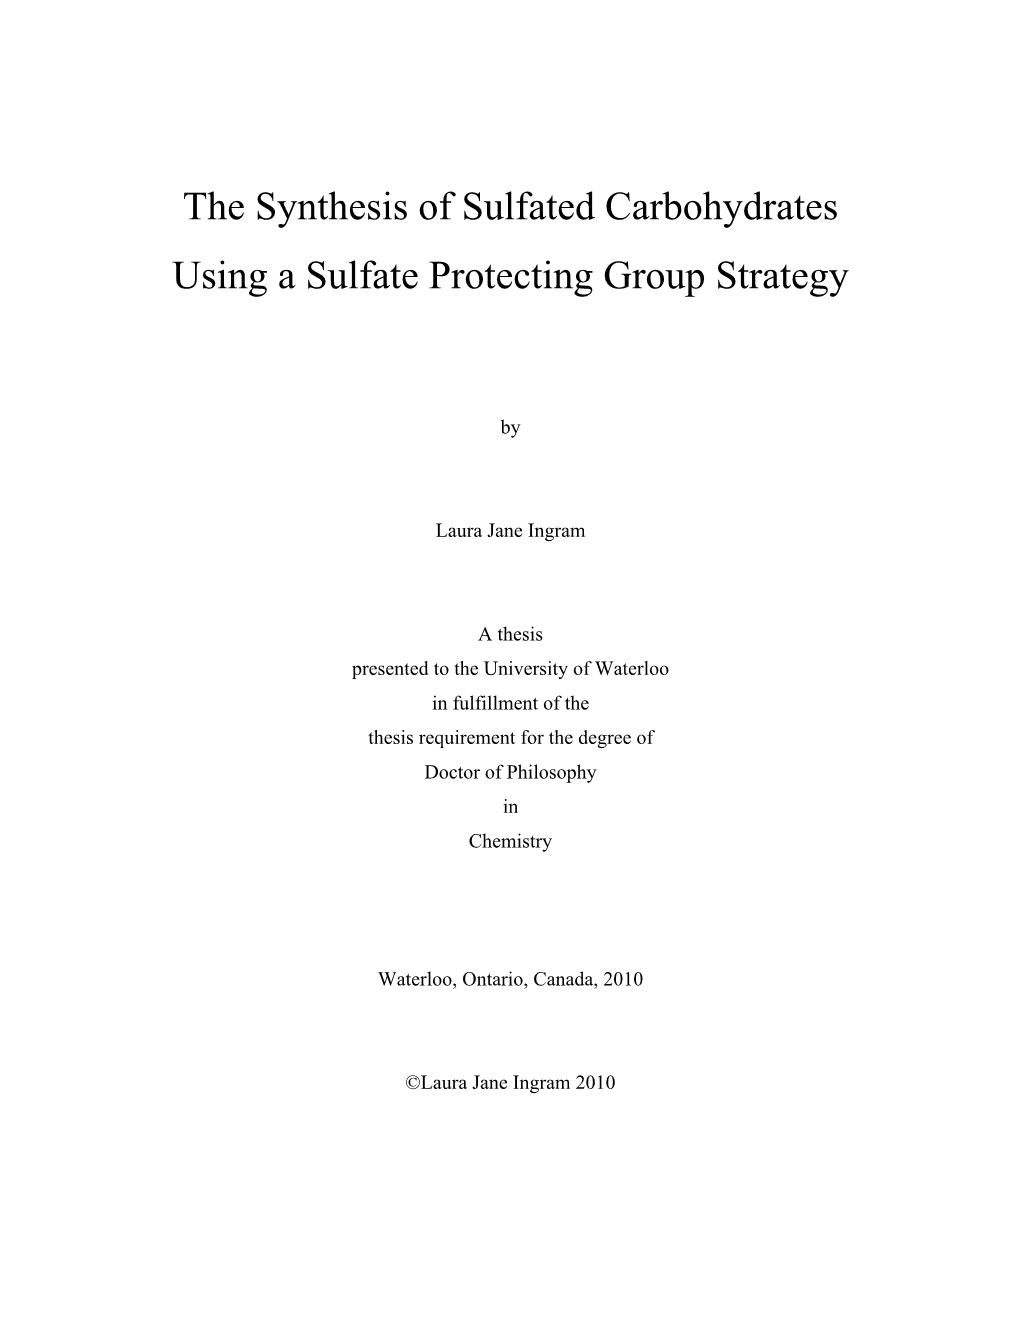 The Synthesis of Sulfated Carbohydrates Using a Sulfate Protecting Group Strategy